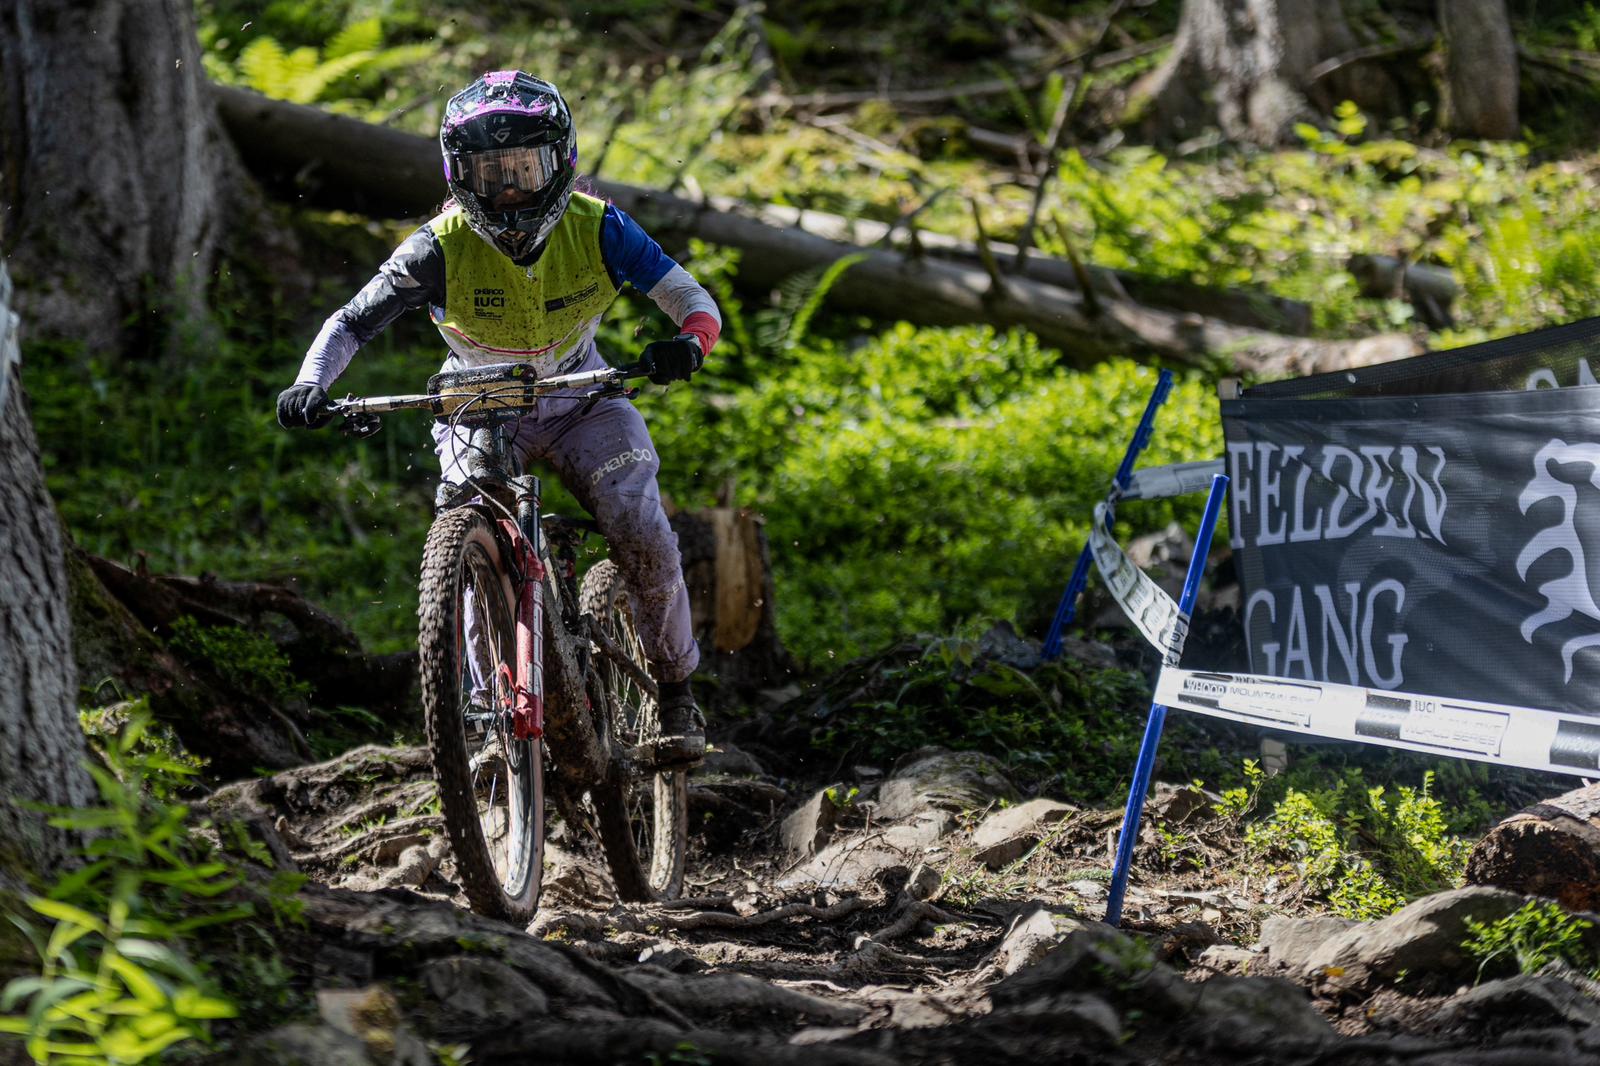 CONSISTENCY IS KEY AS COURDURIER AND RUDE TAKE COMMAND OF UCI ENDURO WORLD CUP